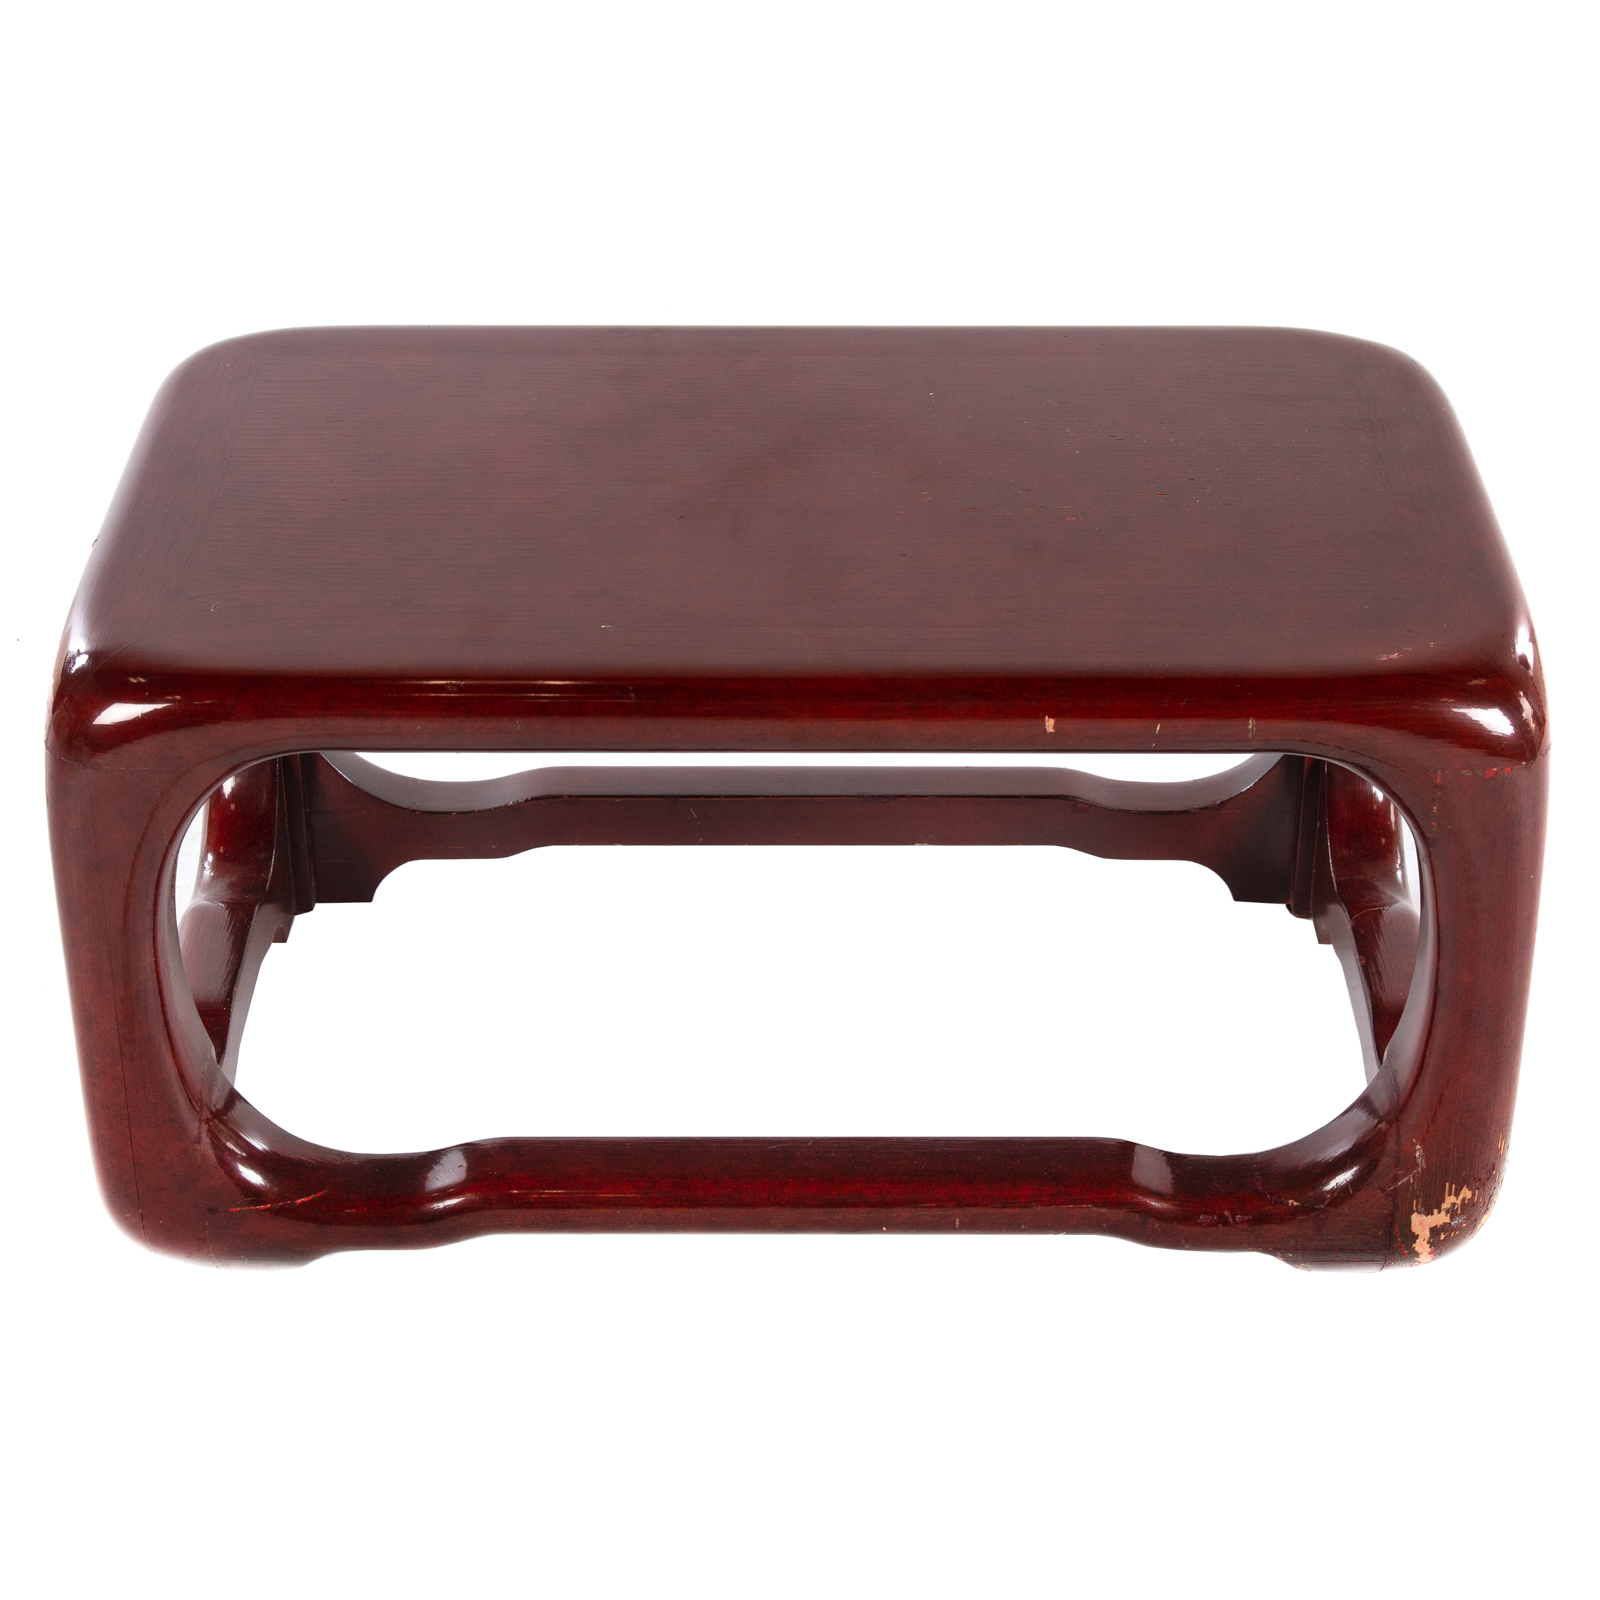 RED LACQUER MODERNIST SIDE TABLE 3c75b2